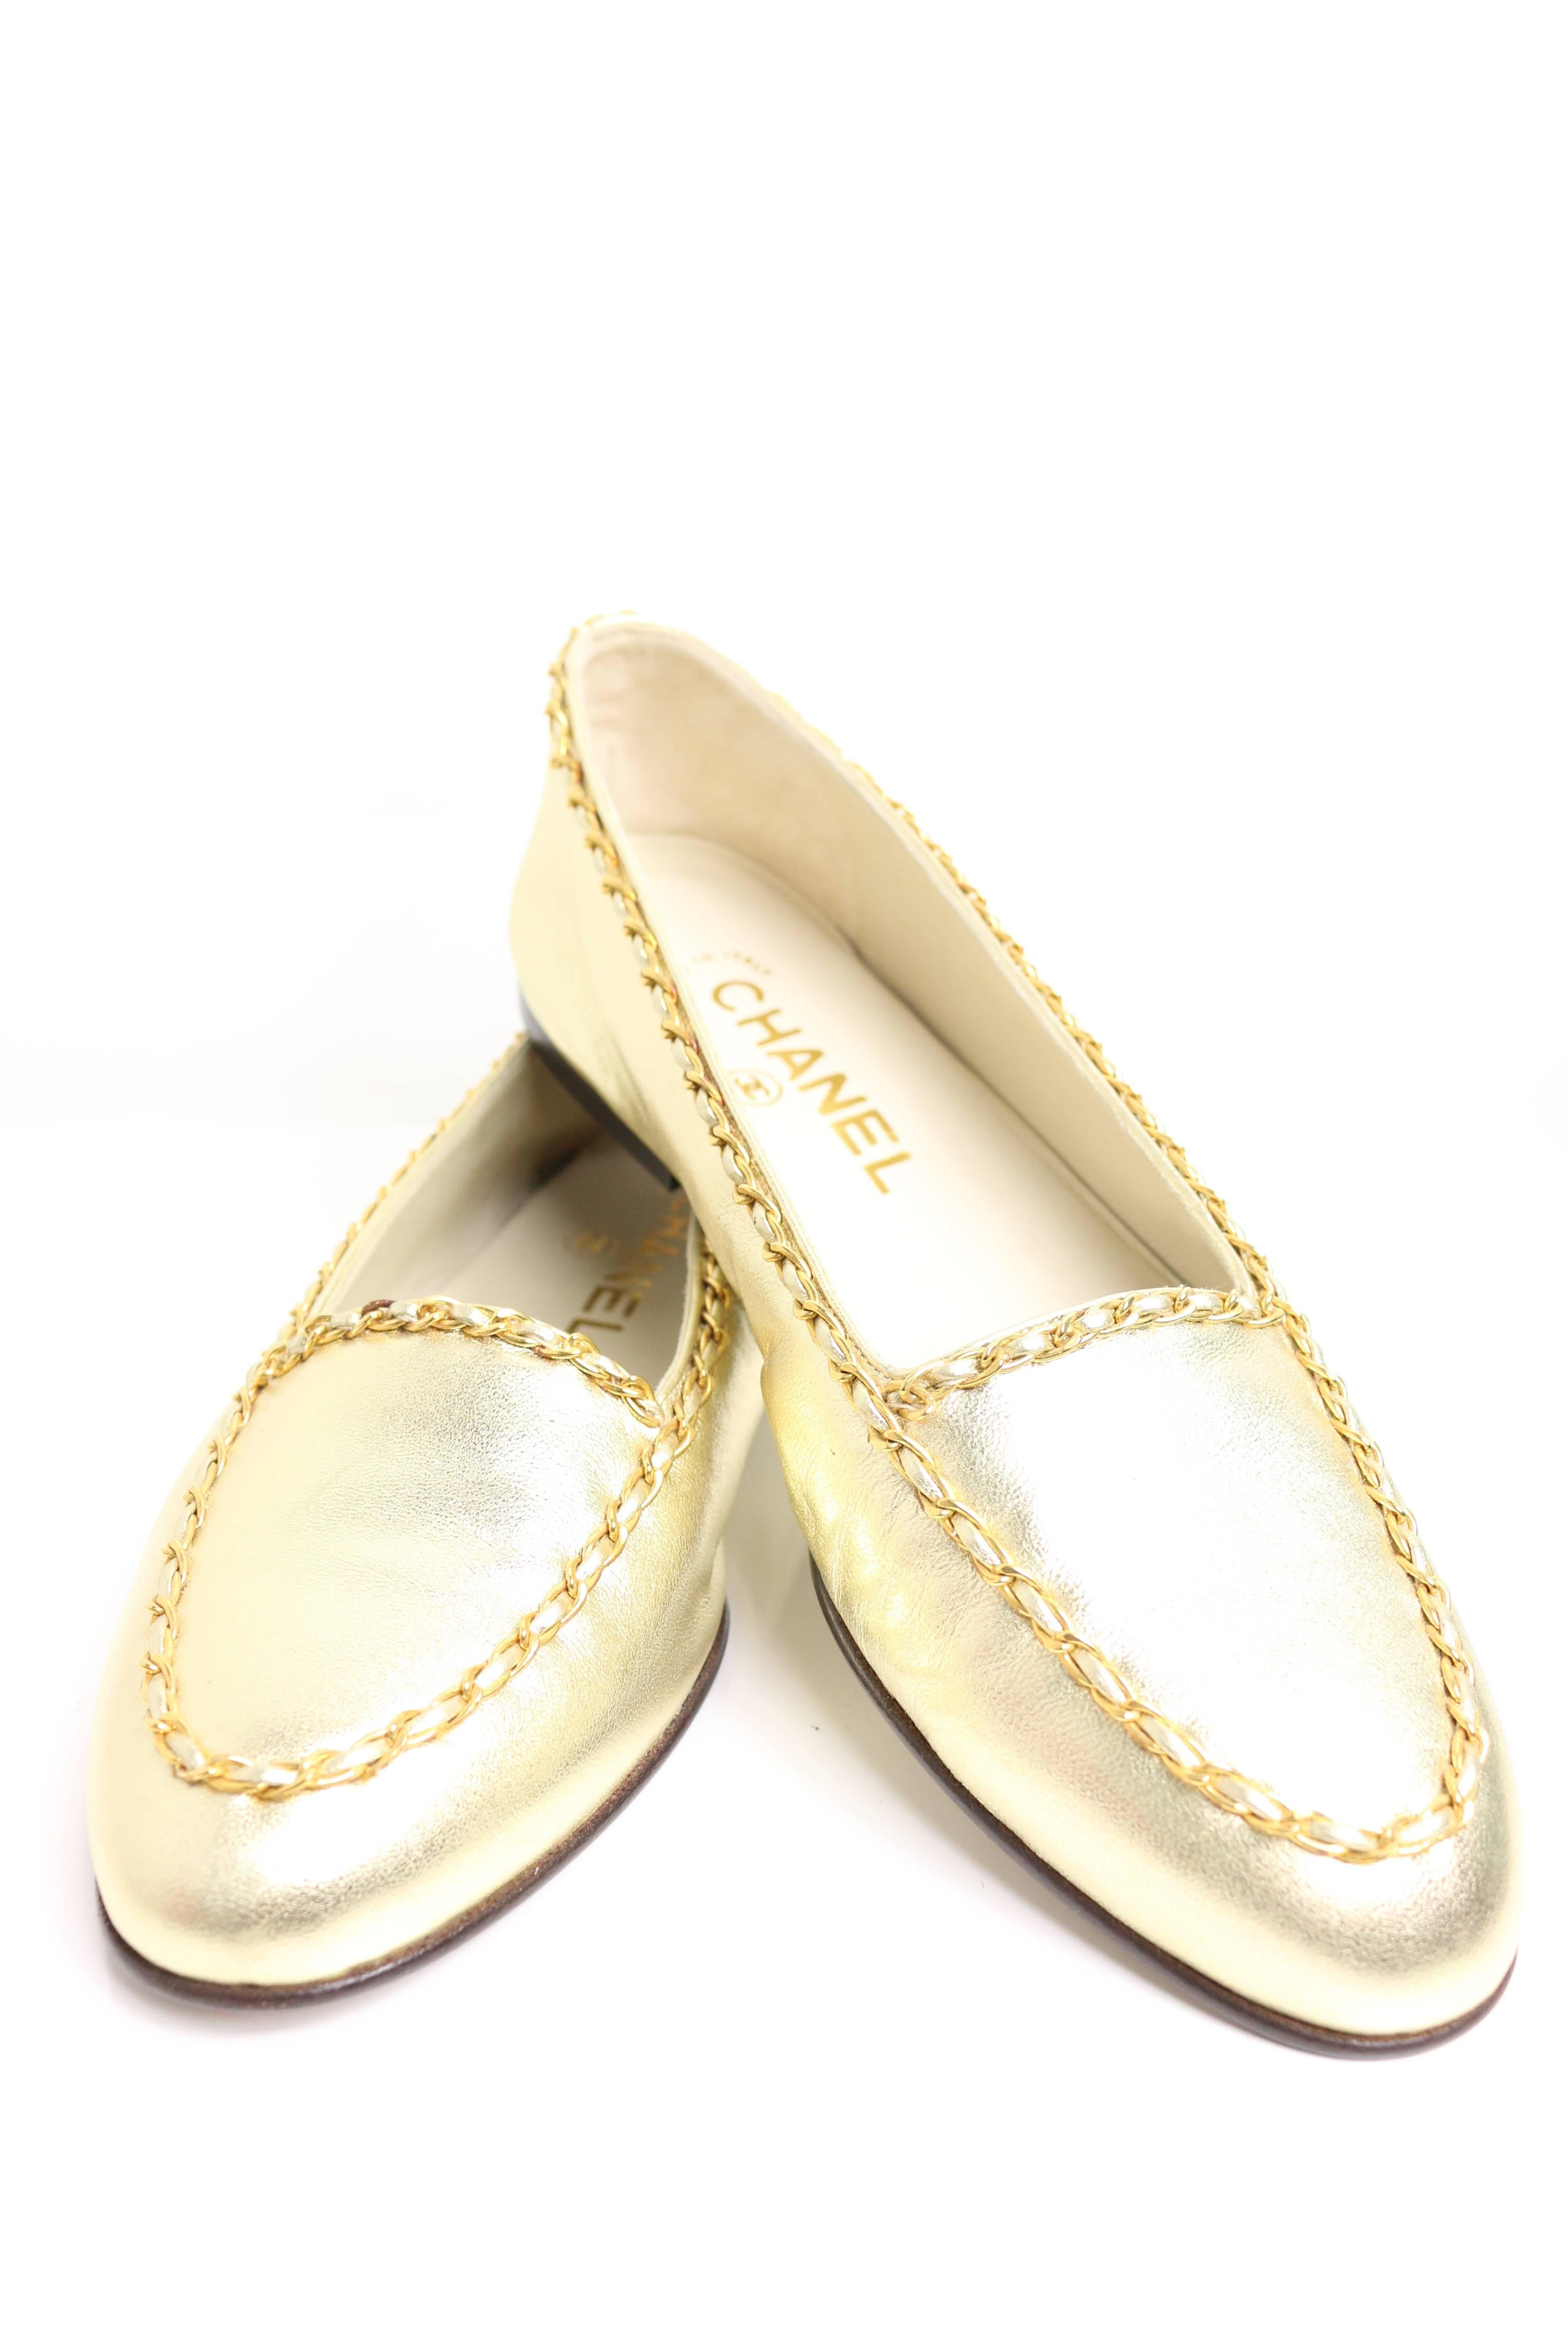 - Vintage 90s Chanel classic gold lambskin leather flats with gold chain. 

- Size 38 Italy. 